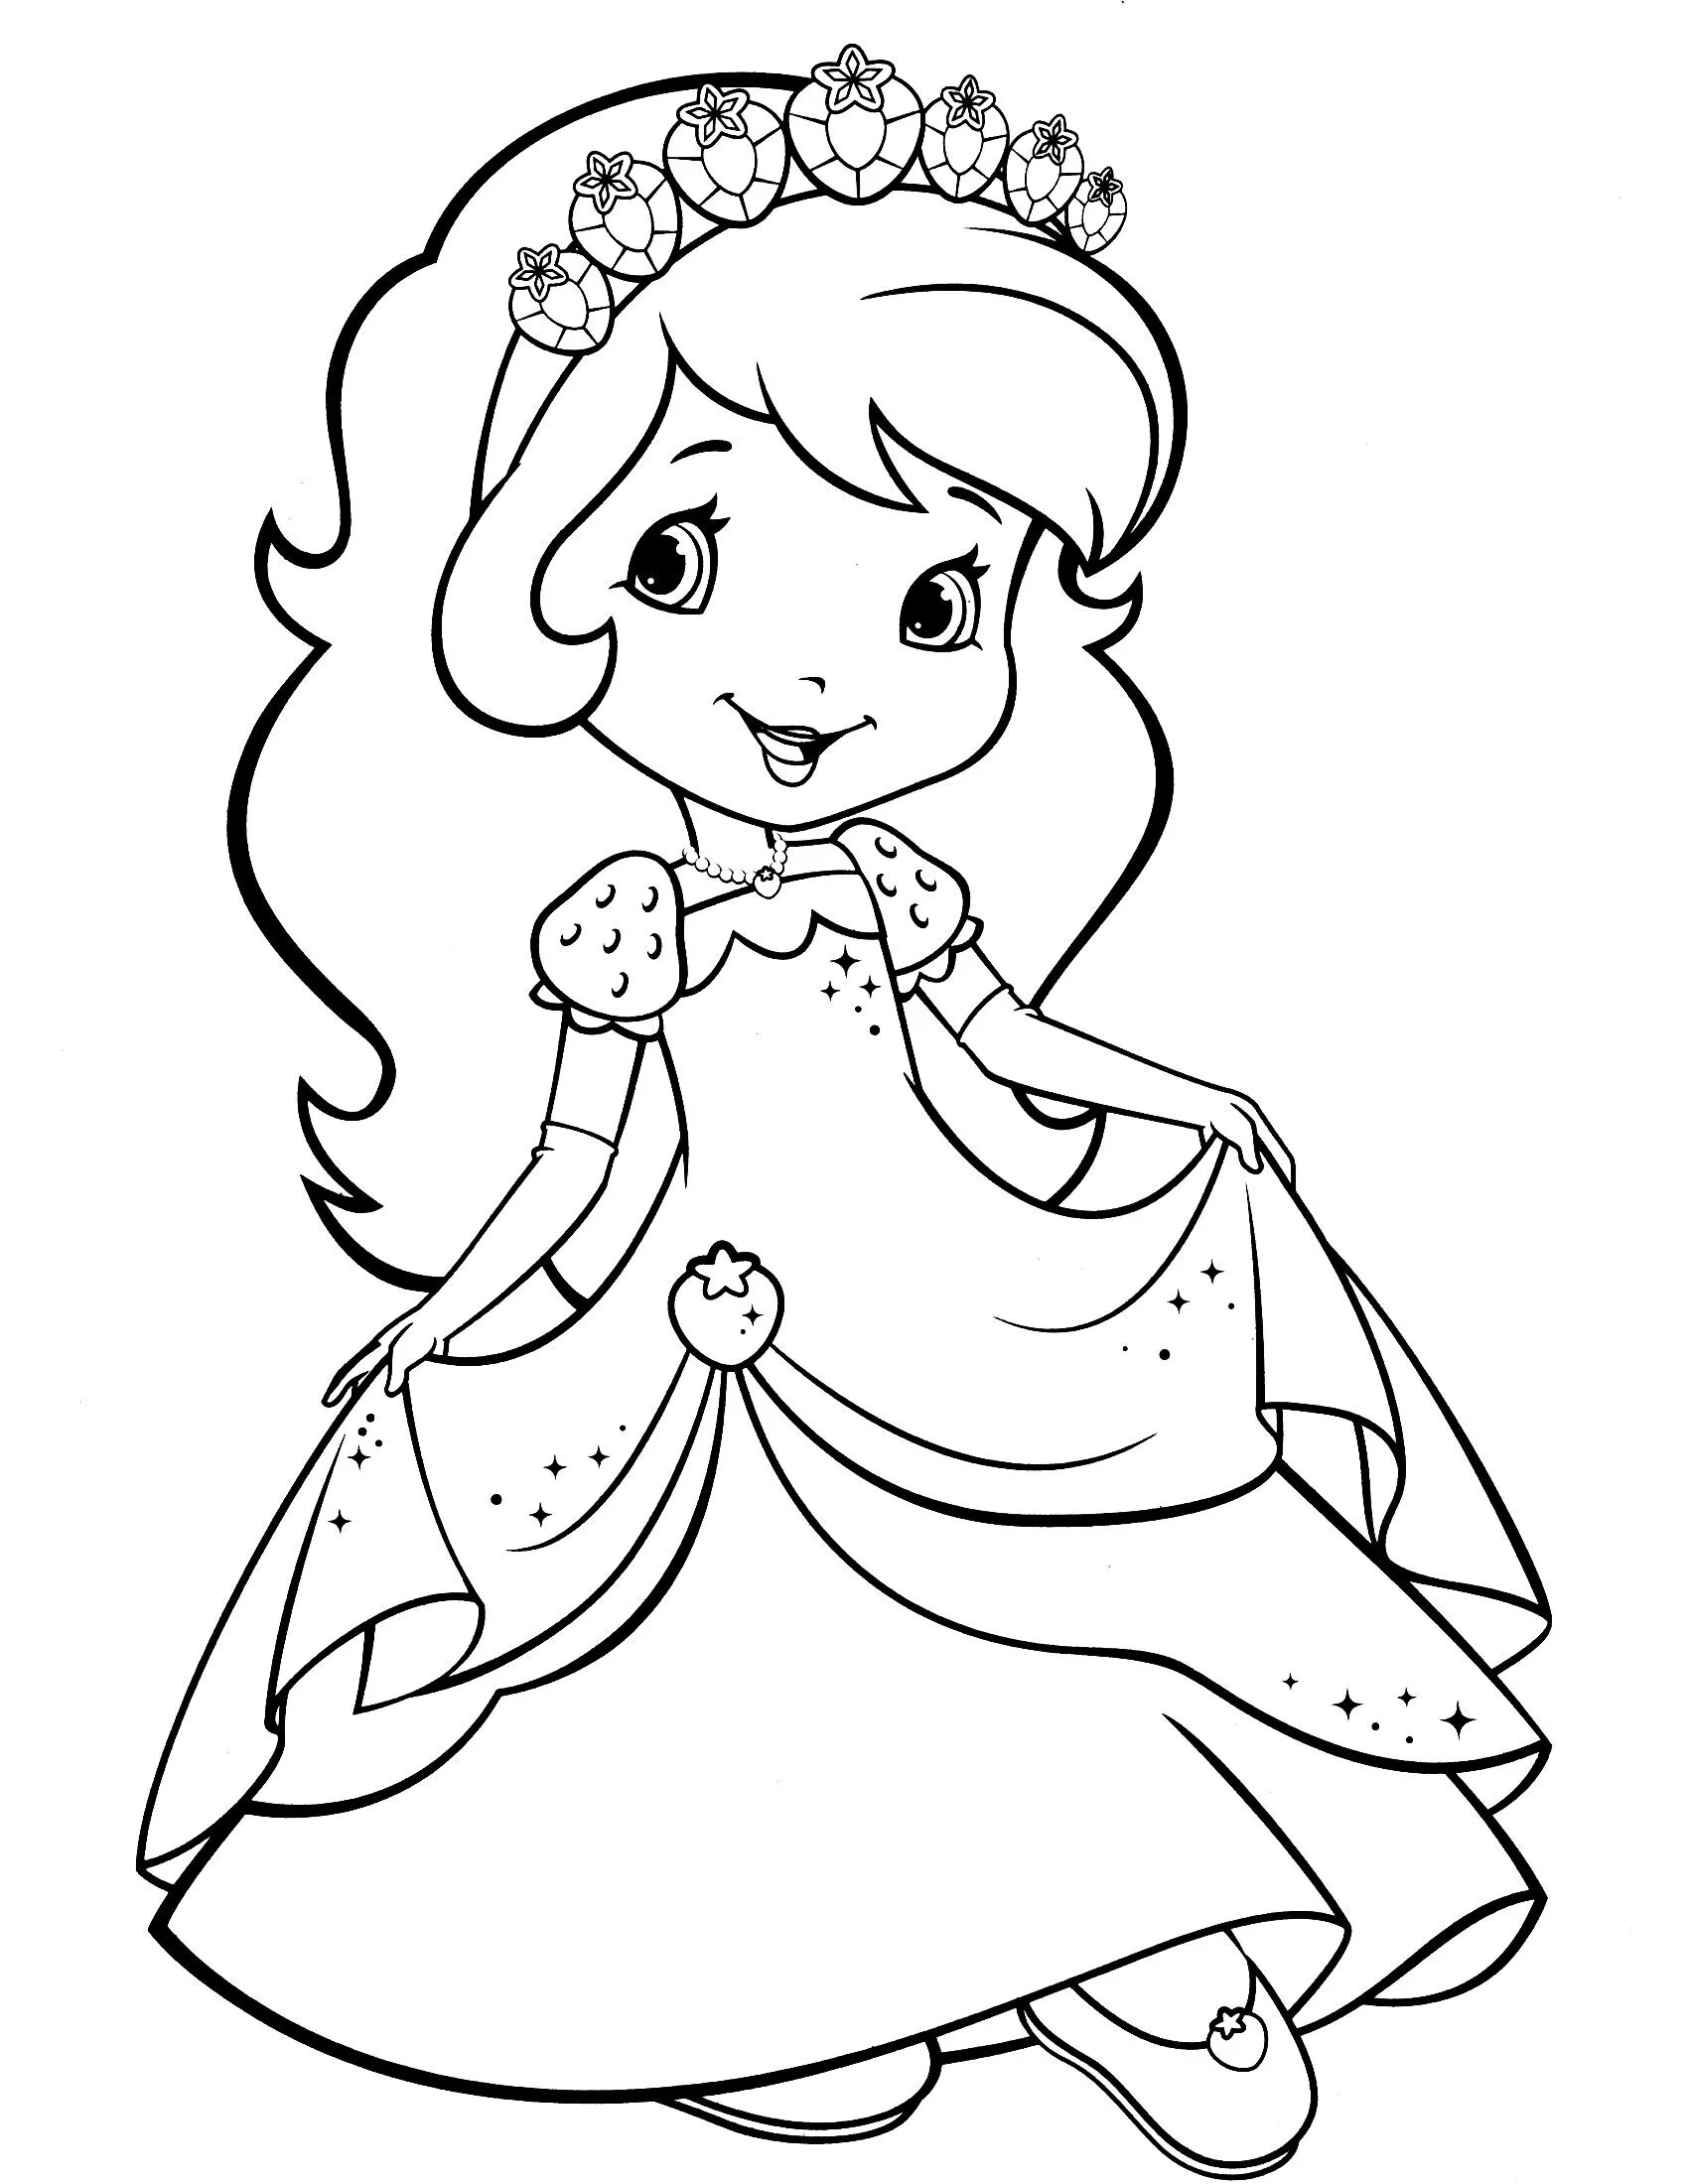 Exciting princess coloring pages for girls 4 years old